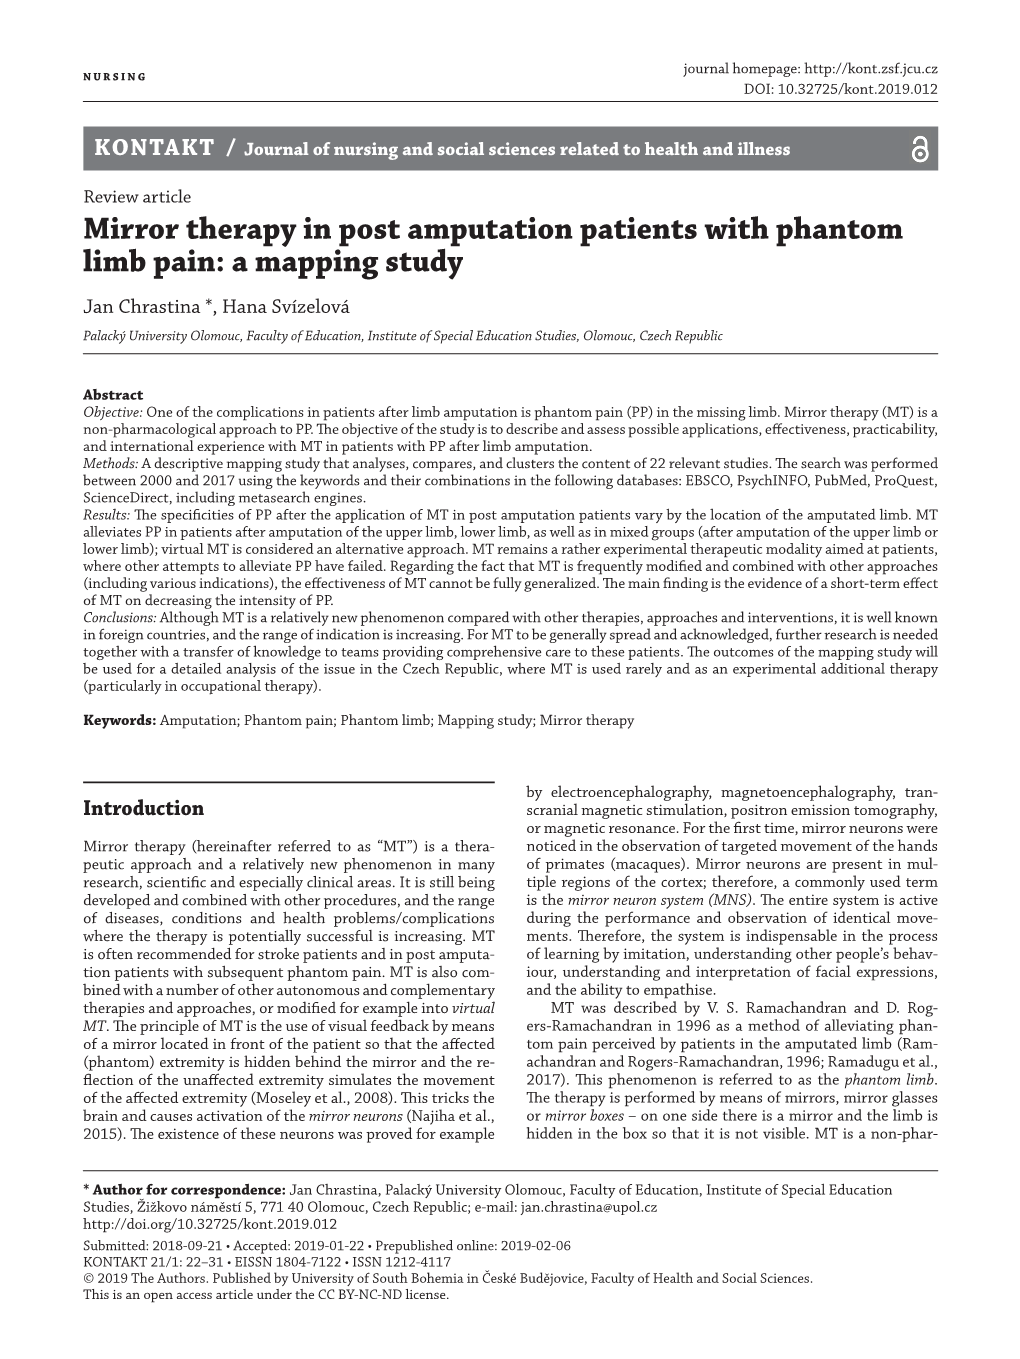 Mirror Therapy in Post Amputation Patients with Phantom